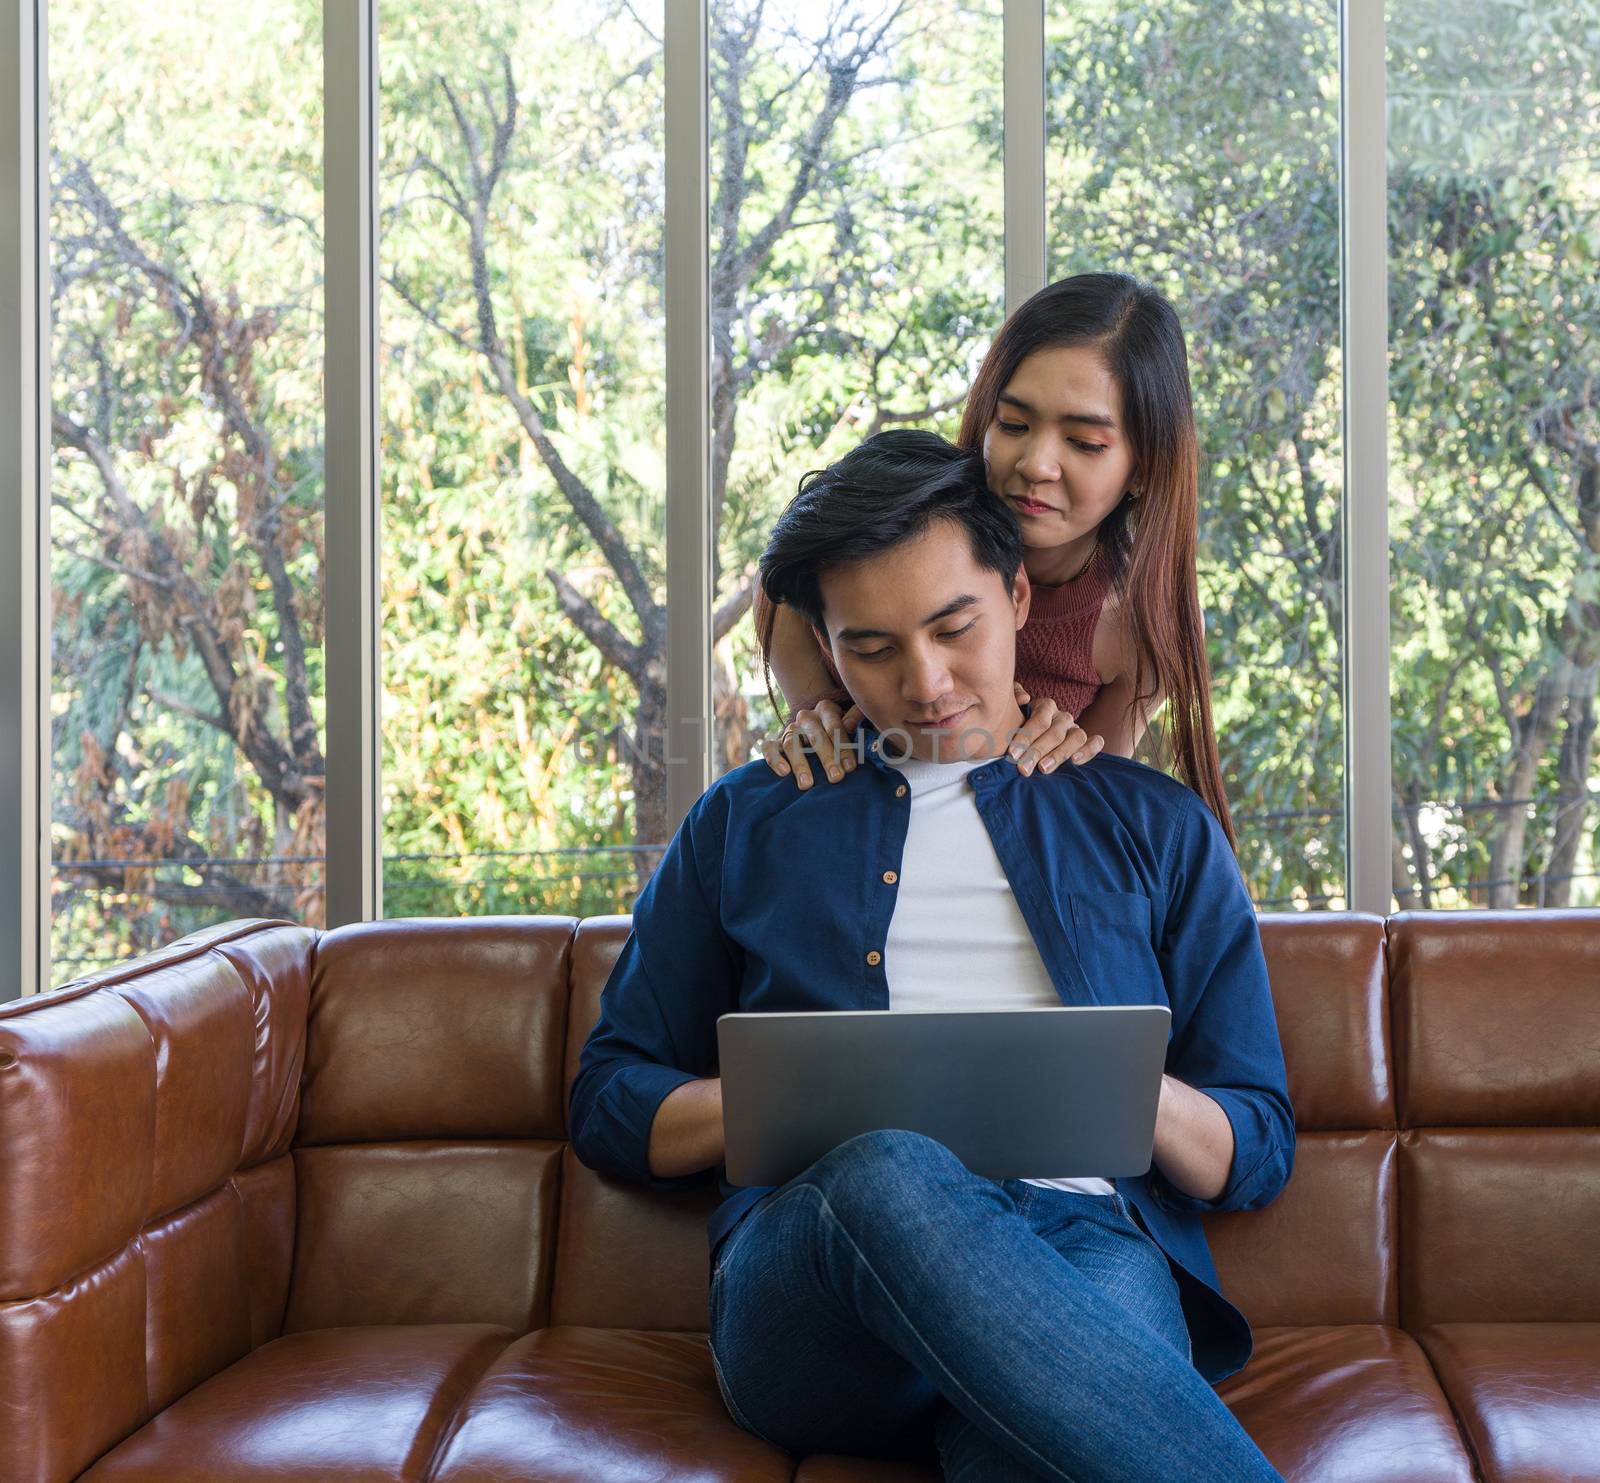 Young lovers spend time together on holidays in the living room. Both of them are interested in internet product information while the man held laptop computer.